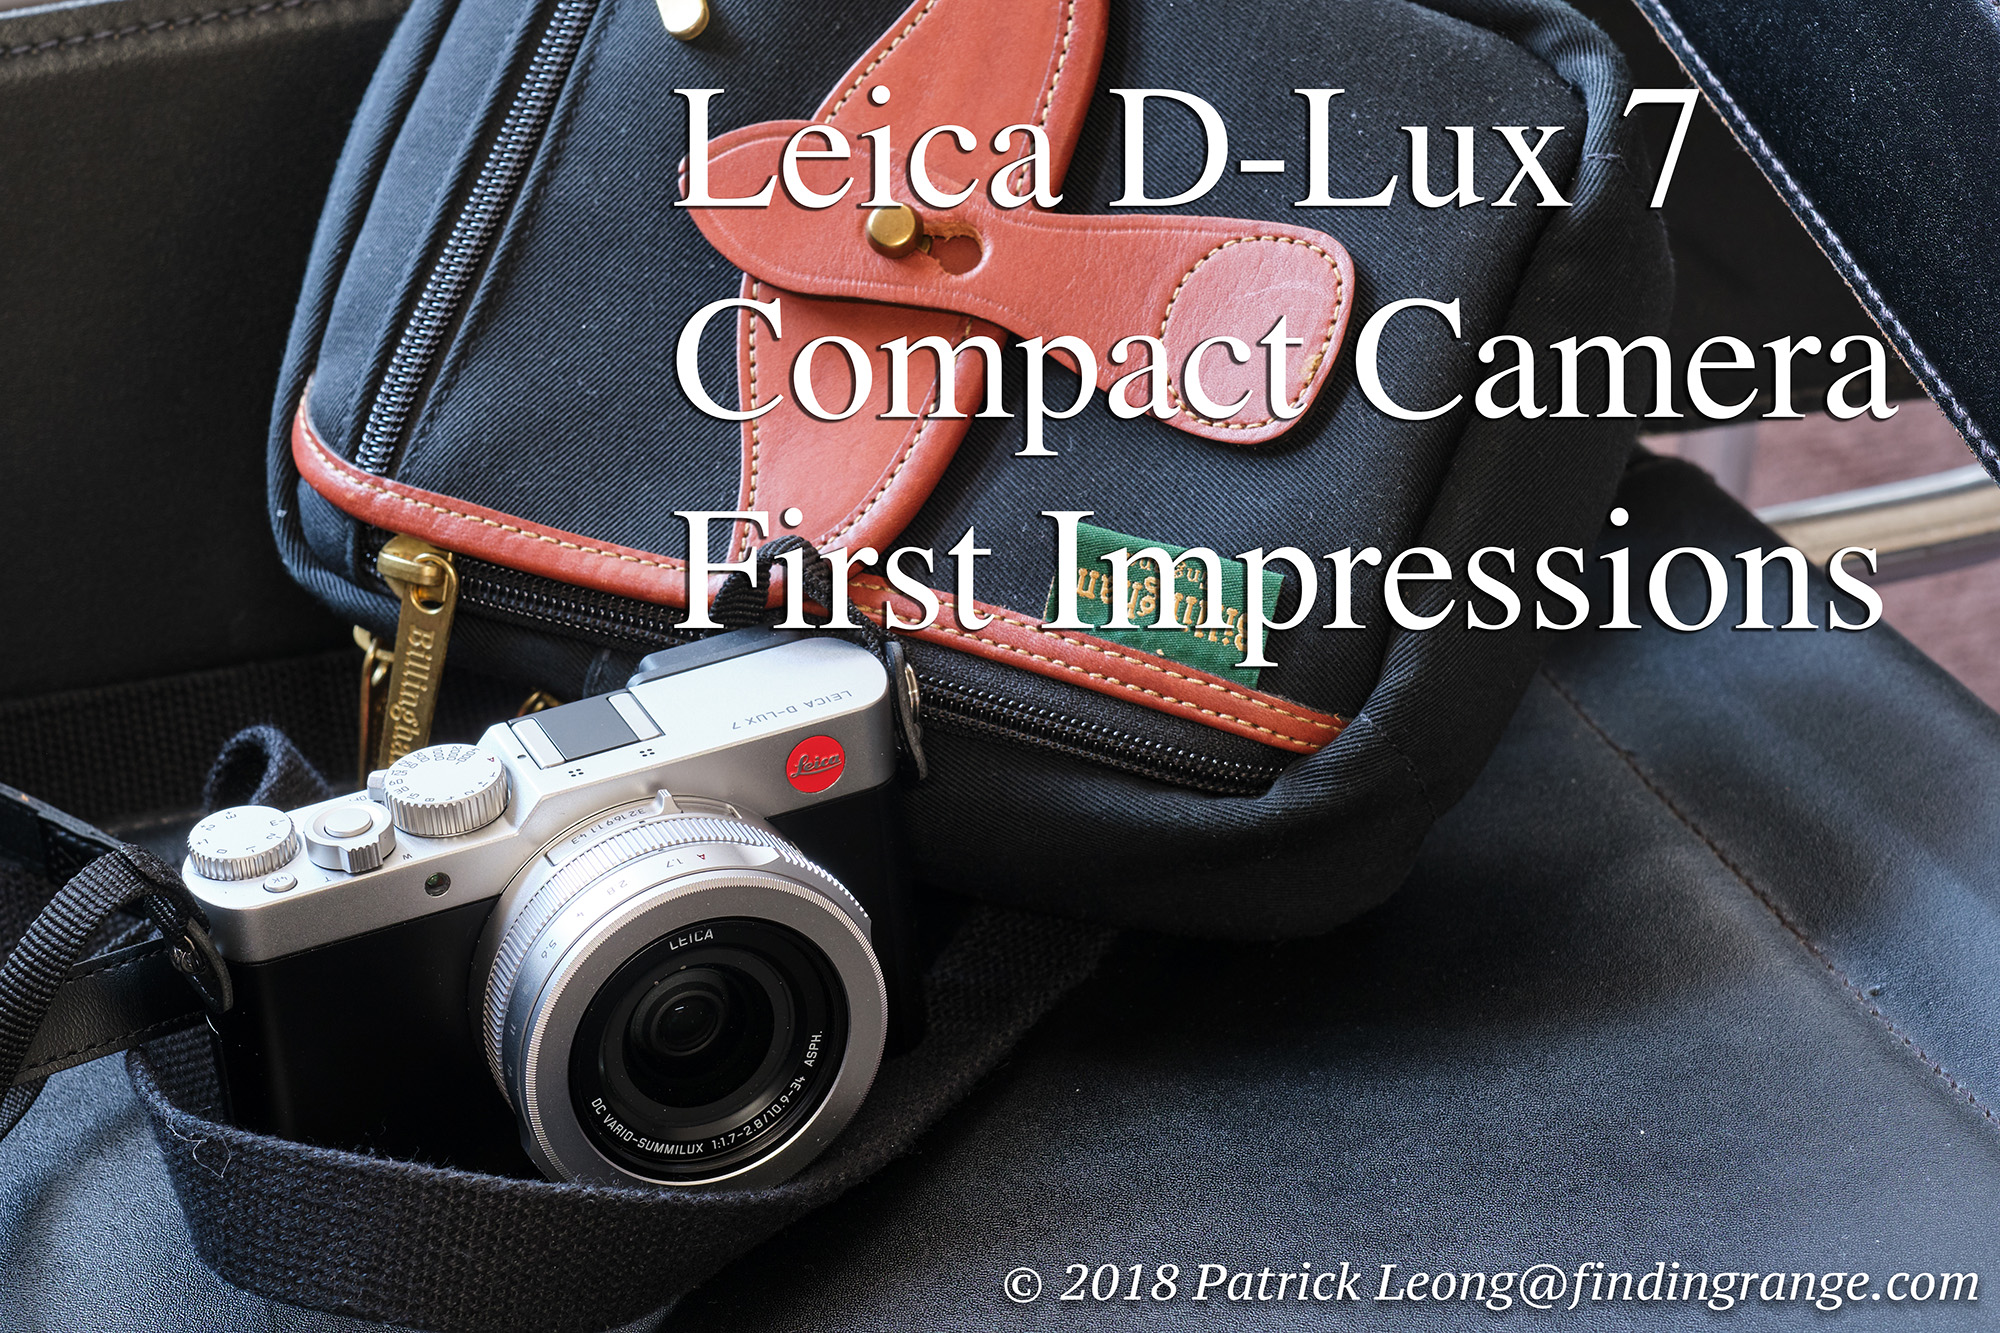 Leica D Lux 7, I am very busy